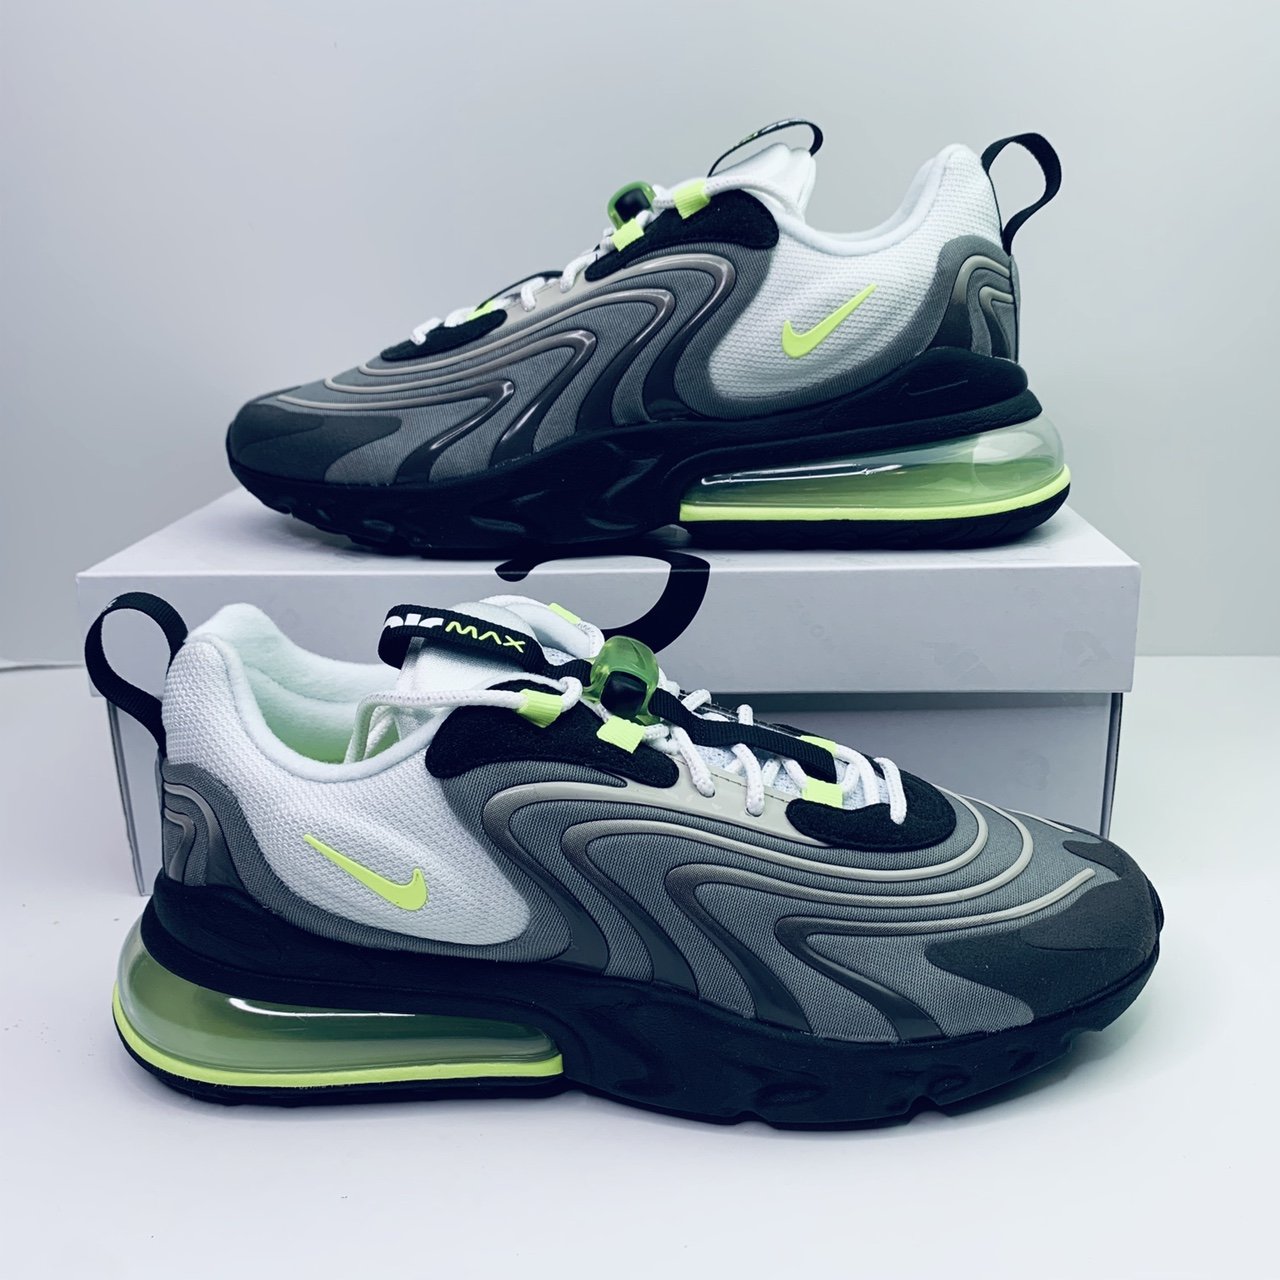 Nike Air Max 270 React Eng Trainers - Dust Volt CW2623-001